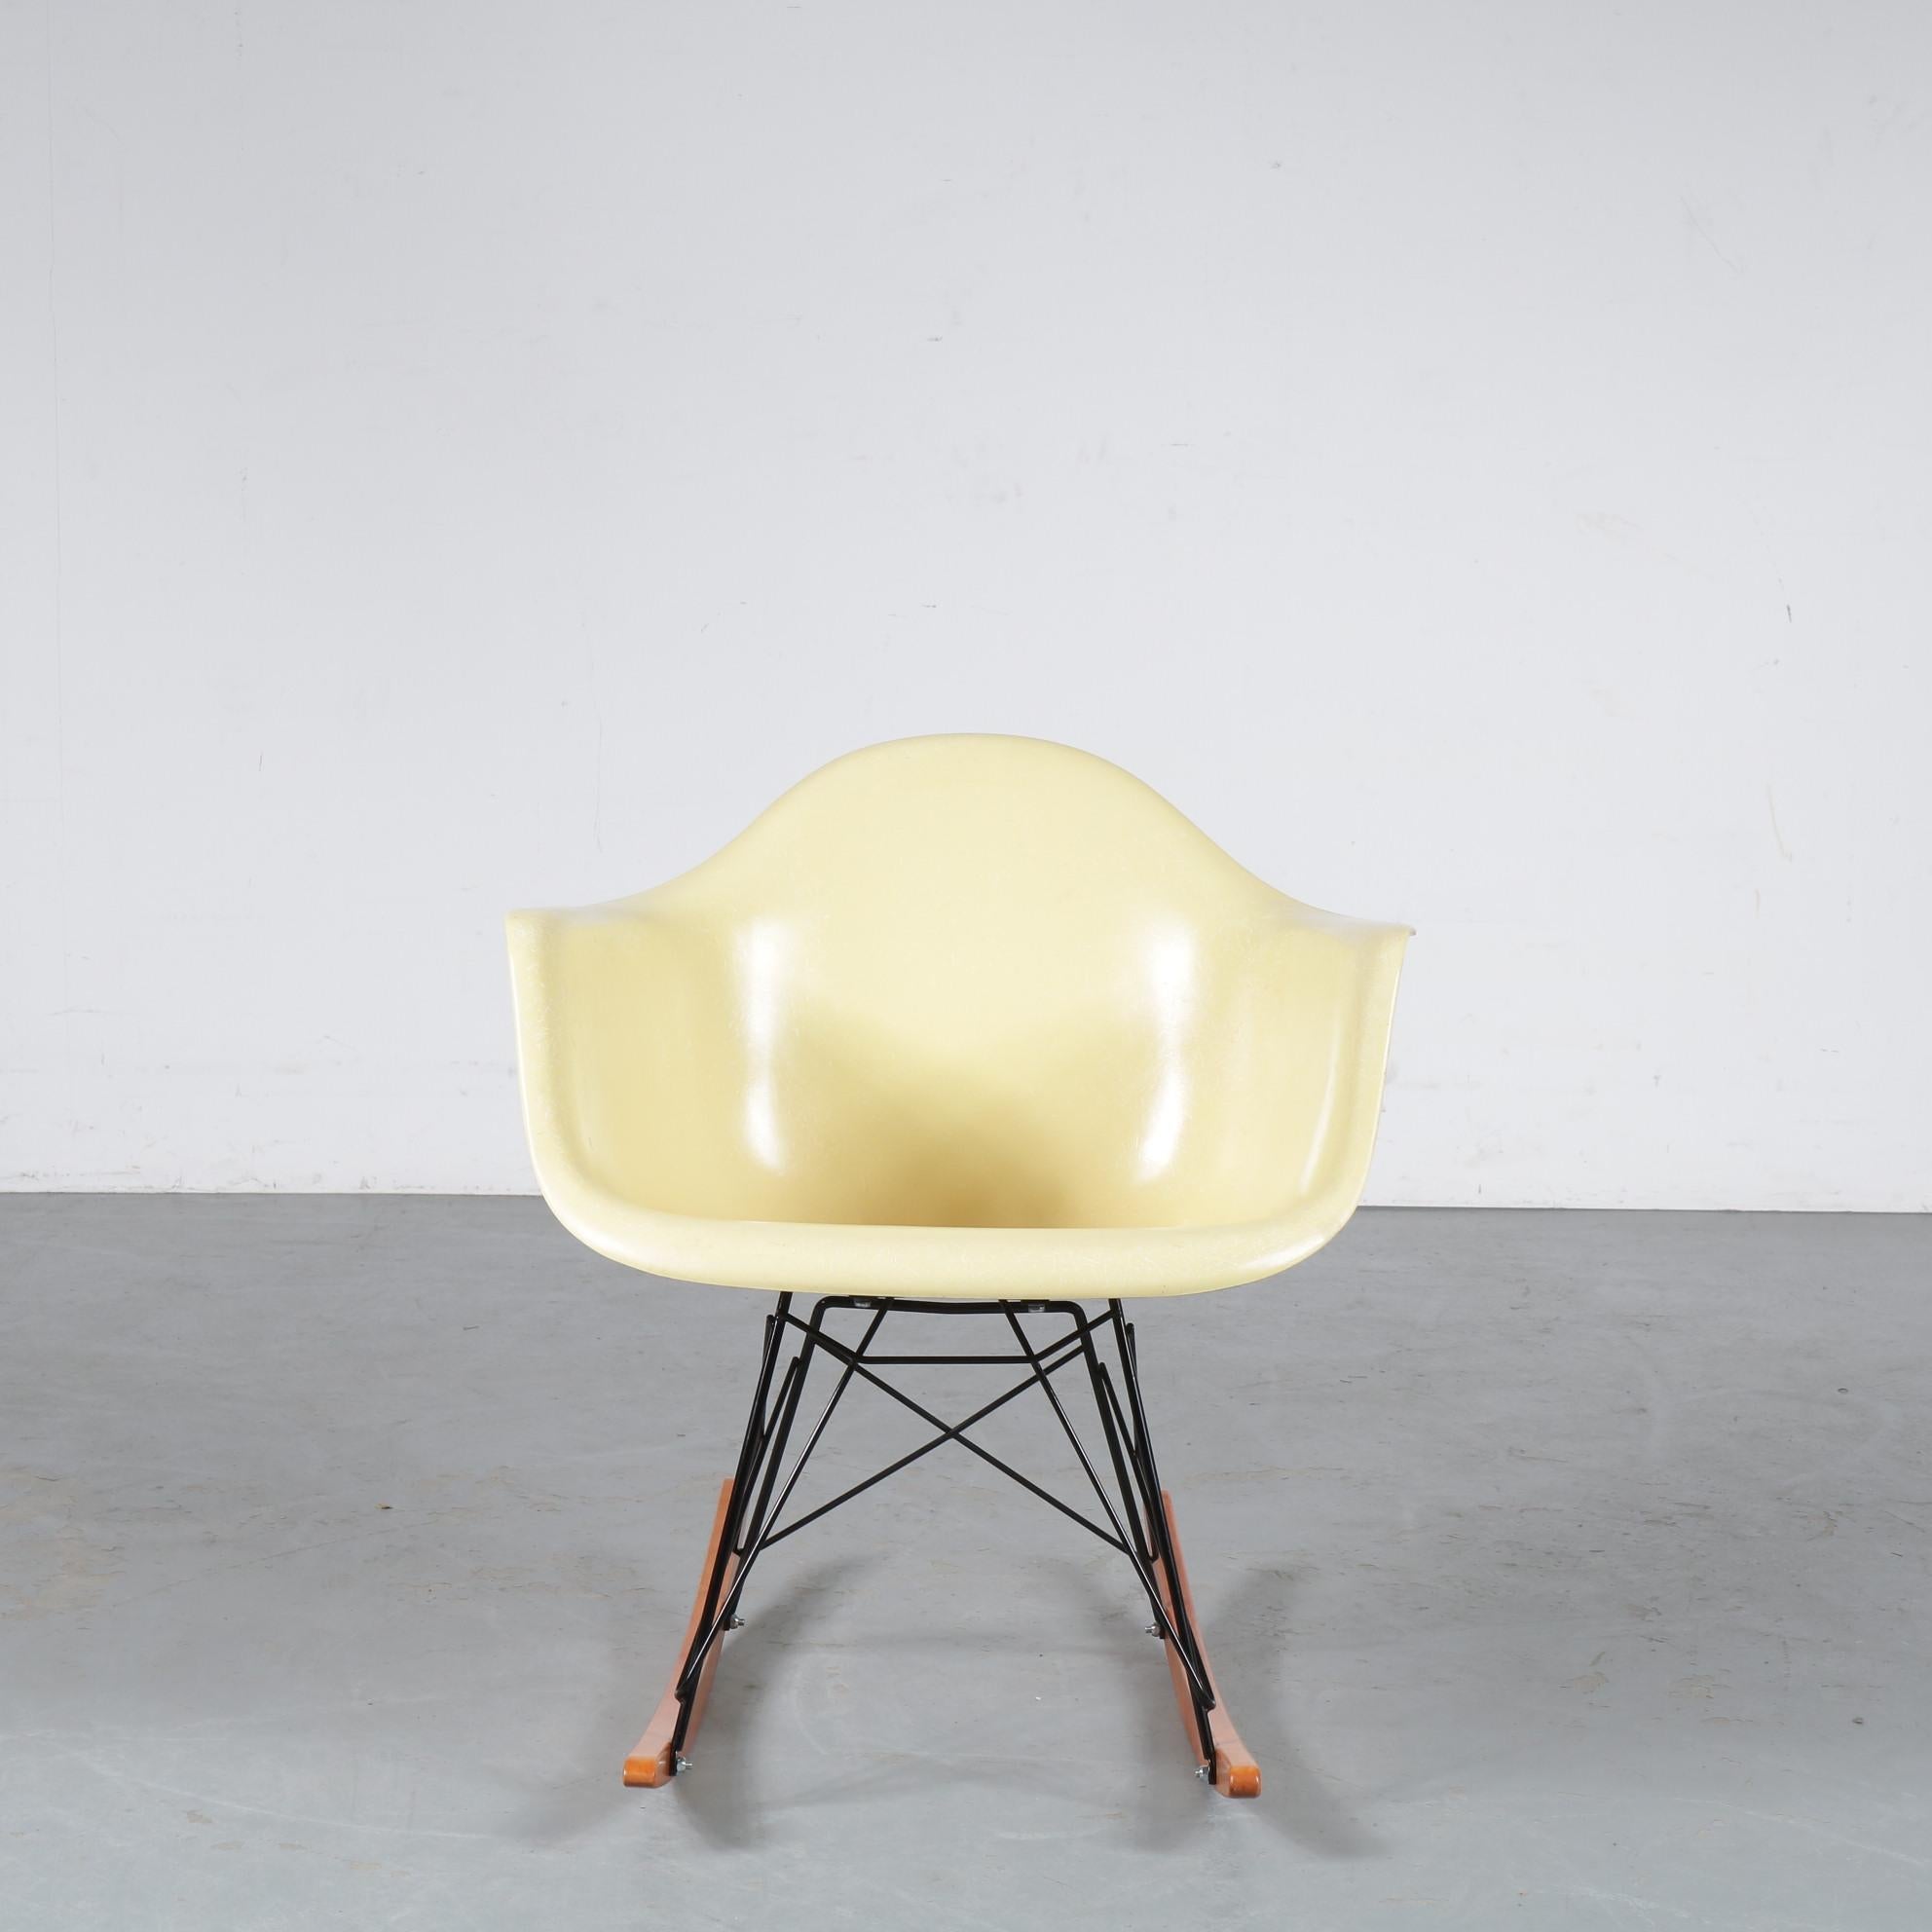 A very rare rocking chair designed by Charles & Ray Eames, manufactured by Zenith / Herman Miller in the United States of America around 1950.

The first fiberglass Eames chairs were produced by Zenith Plastics and came in a limited palate of five